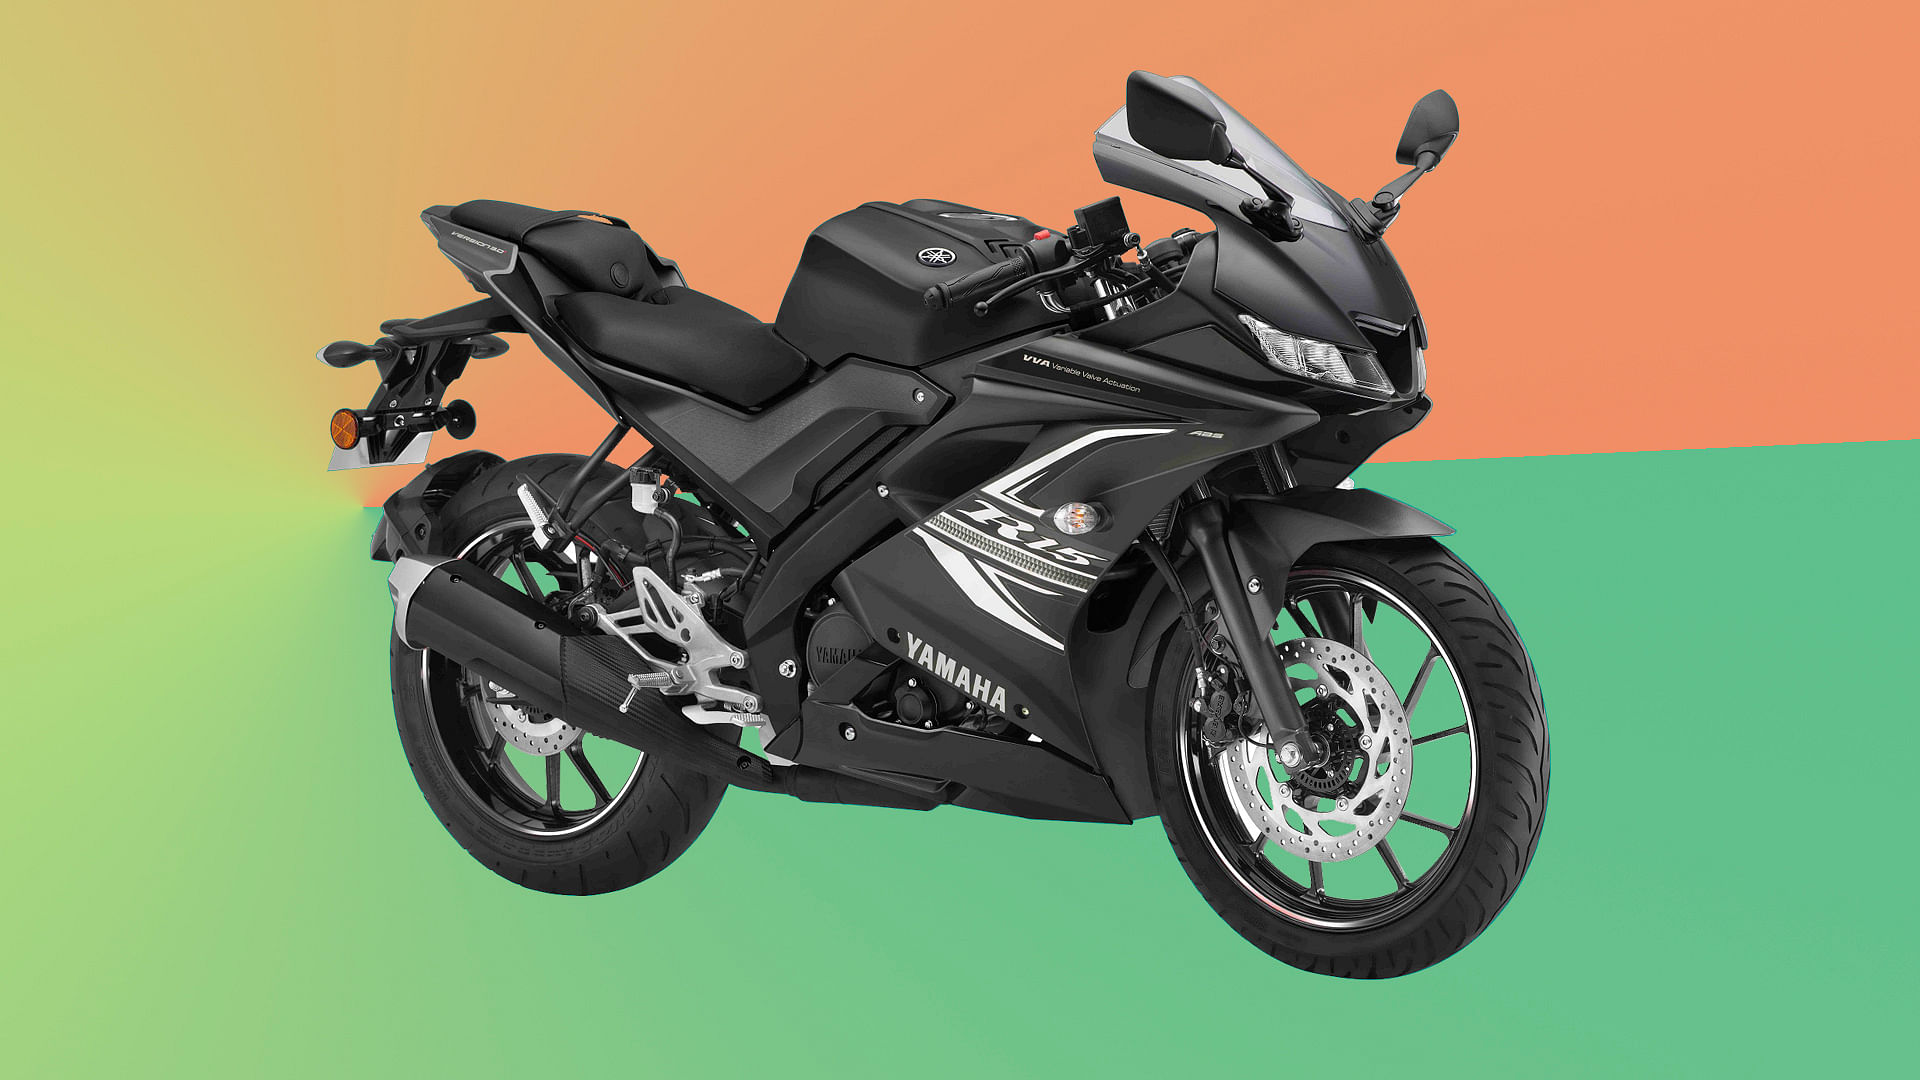 Yamaha R15 V 3.0 BS-VI Launched in India